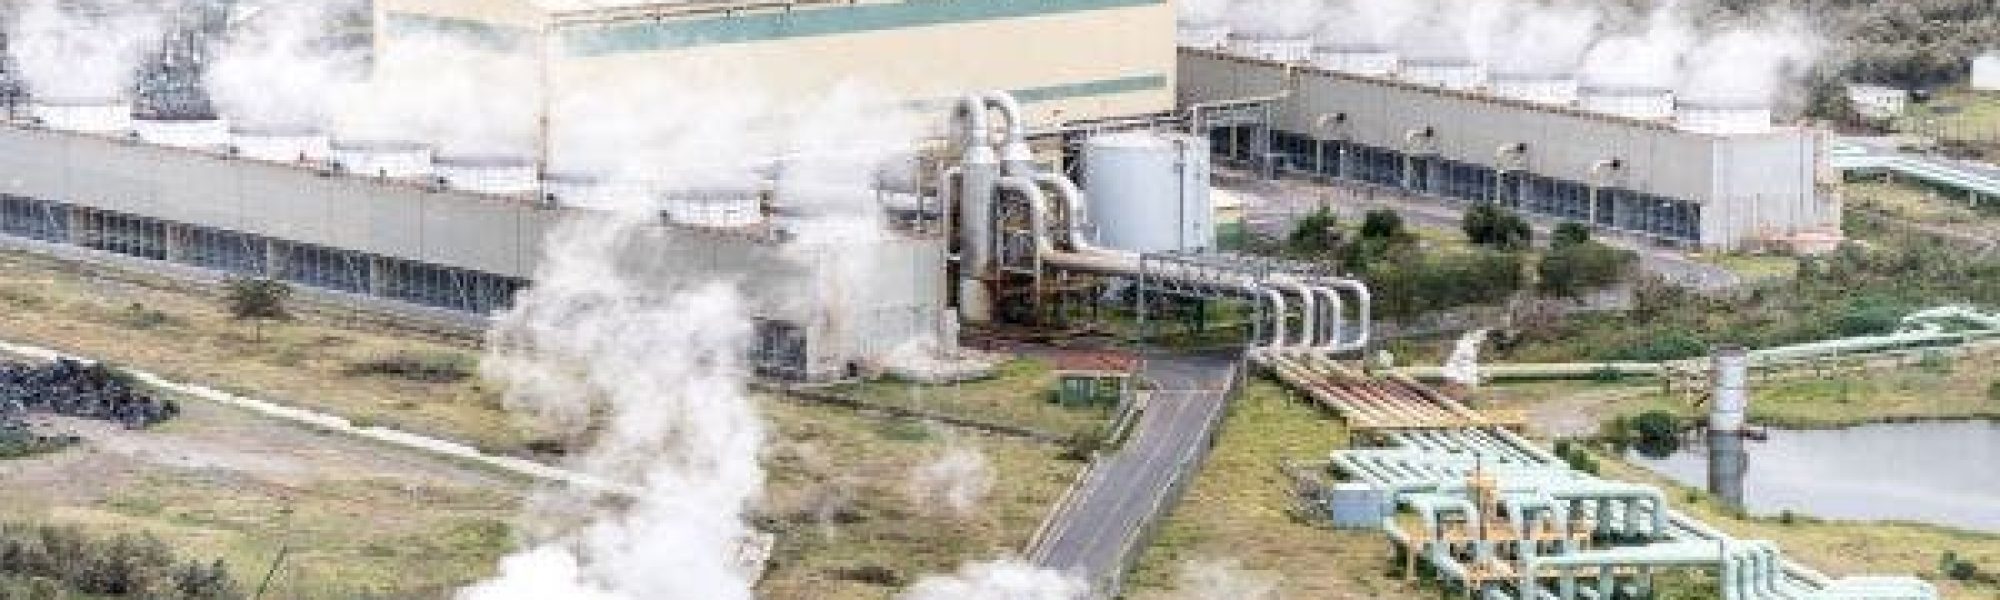 Kenya Electricity Generating Company Plans To Install 3000 MW of Additional Renewable Generation Capacity